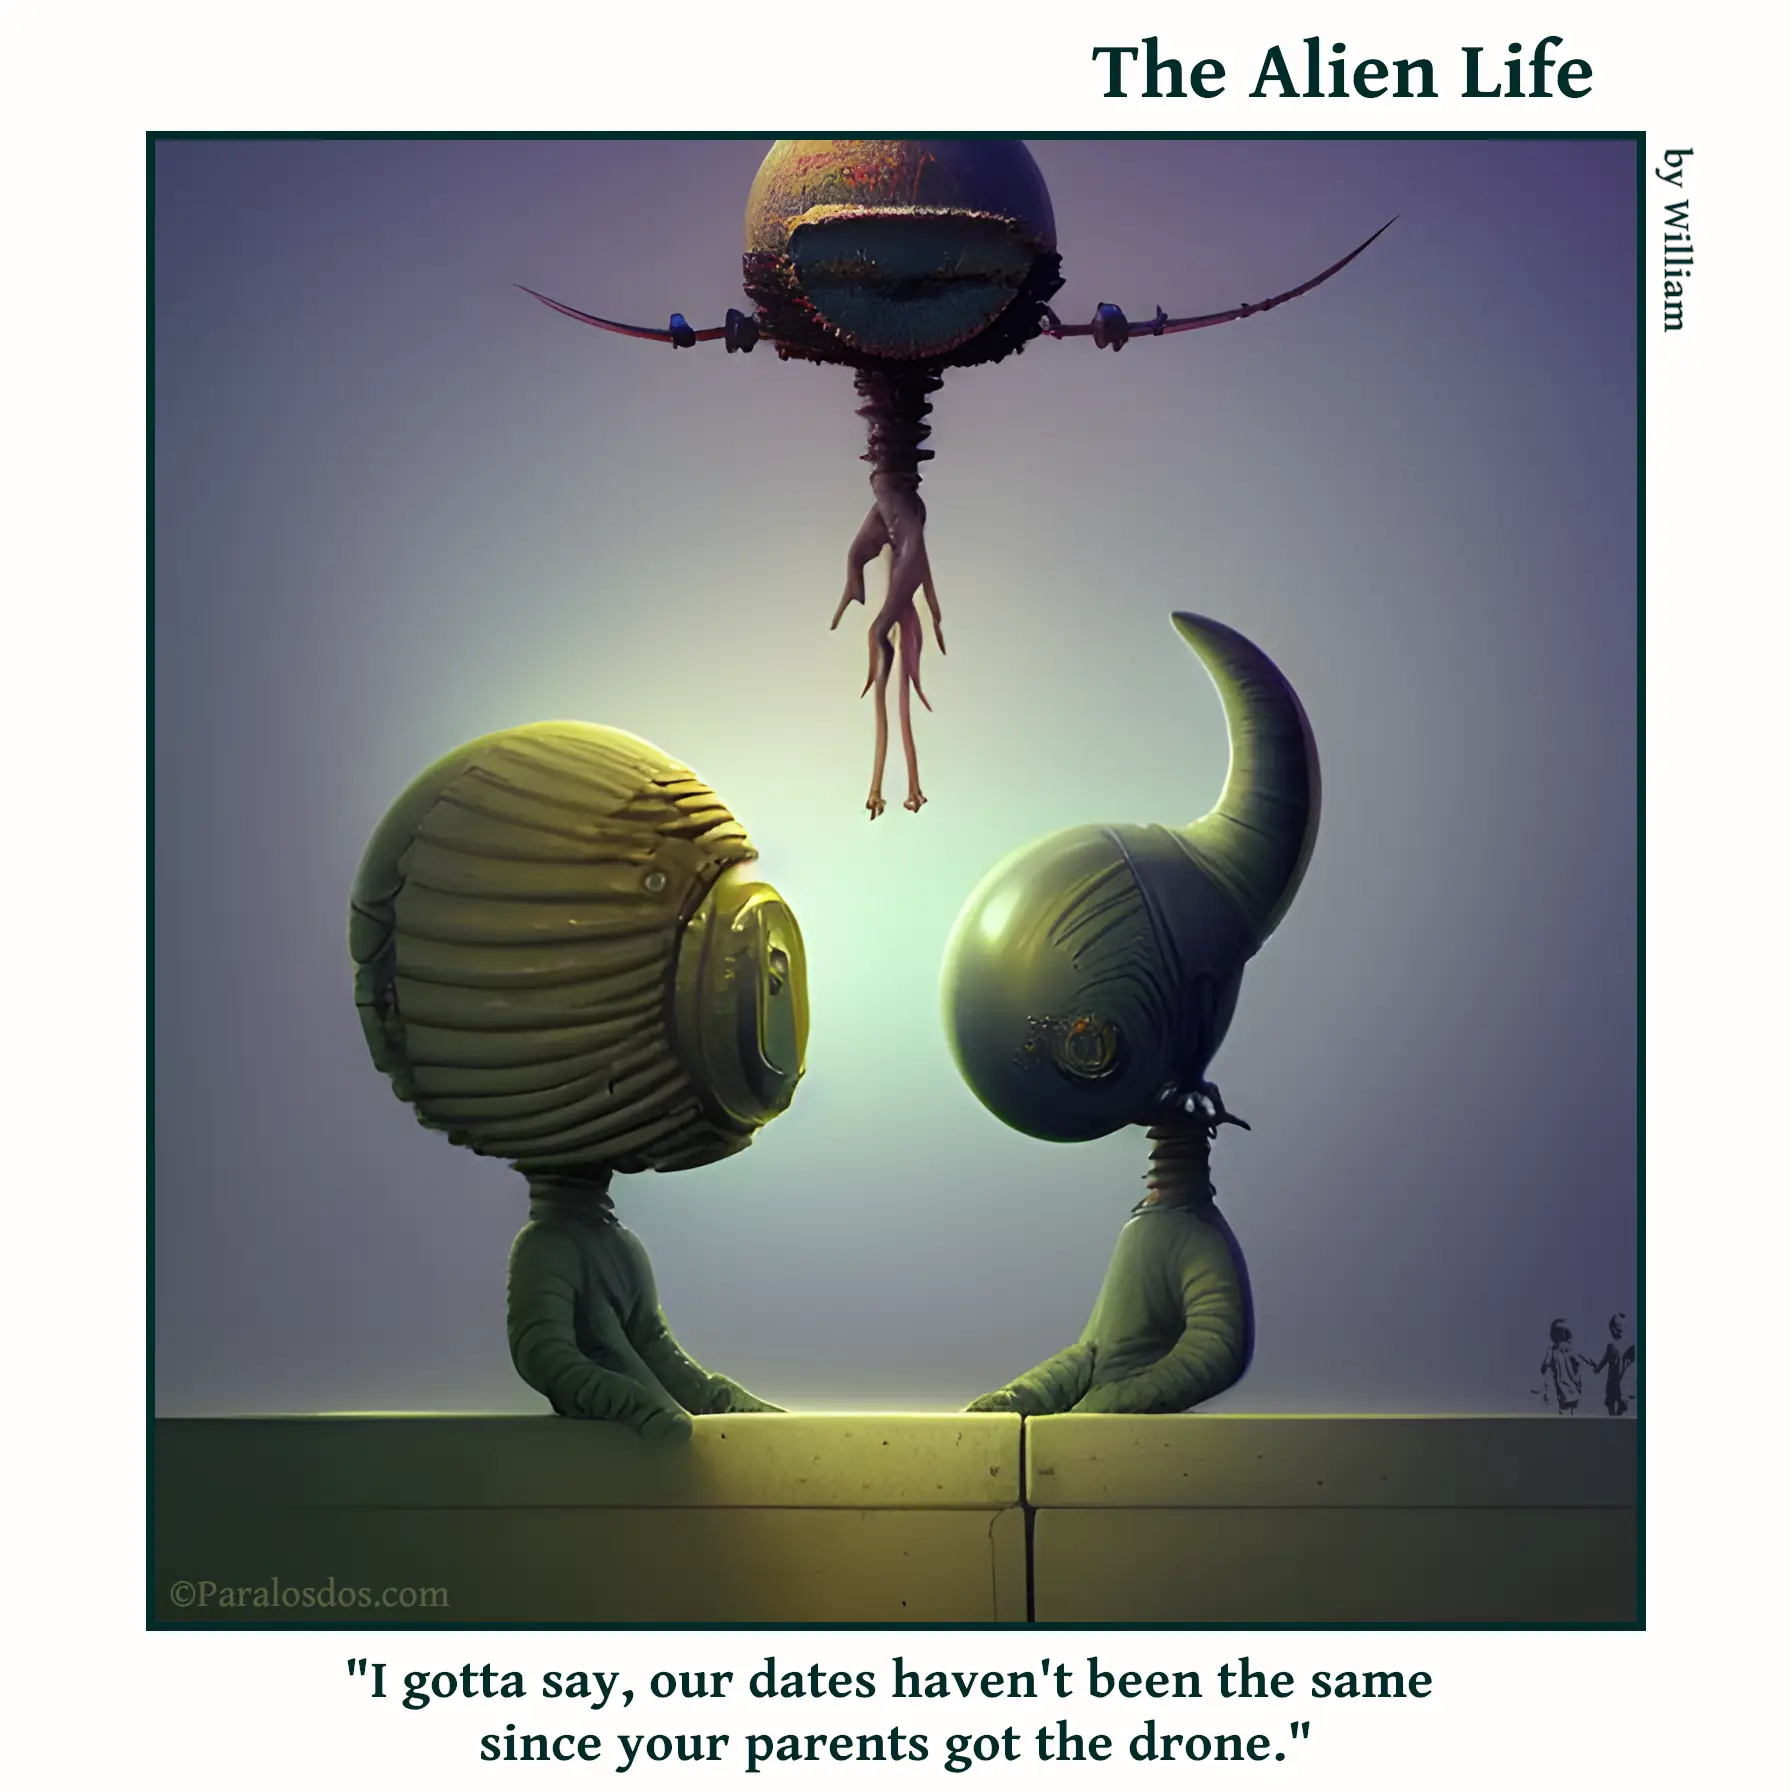 The Alien Life, one panel Comic. Two aliens are on a date. There is an alien drone hovering closely in the background. The caption reads: "I gotta say, our dates haven't been the same since your parents got the drone."